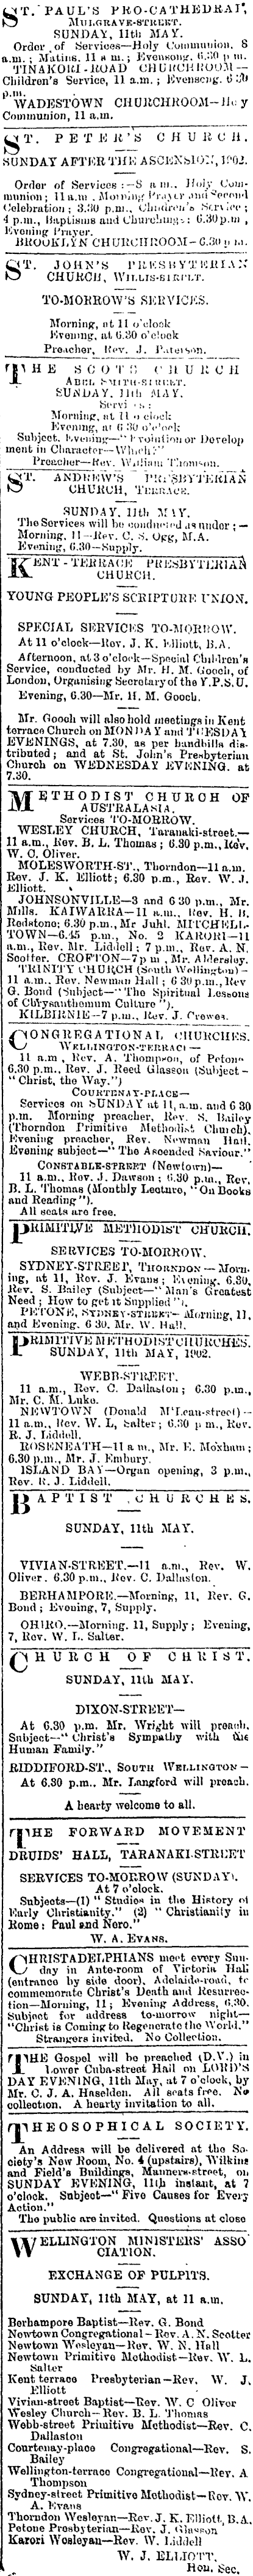 Papers Past Newspapers Evening Post 10 May 1902 Page 6 Advertisements Column 6